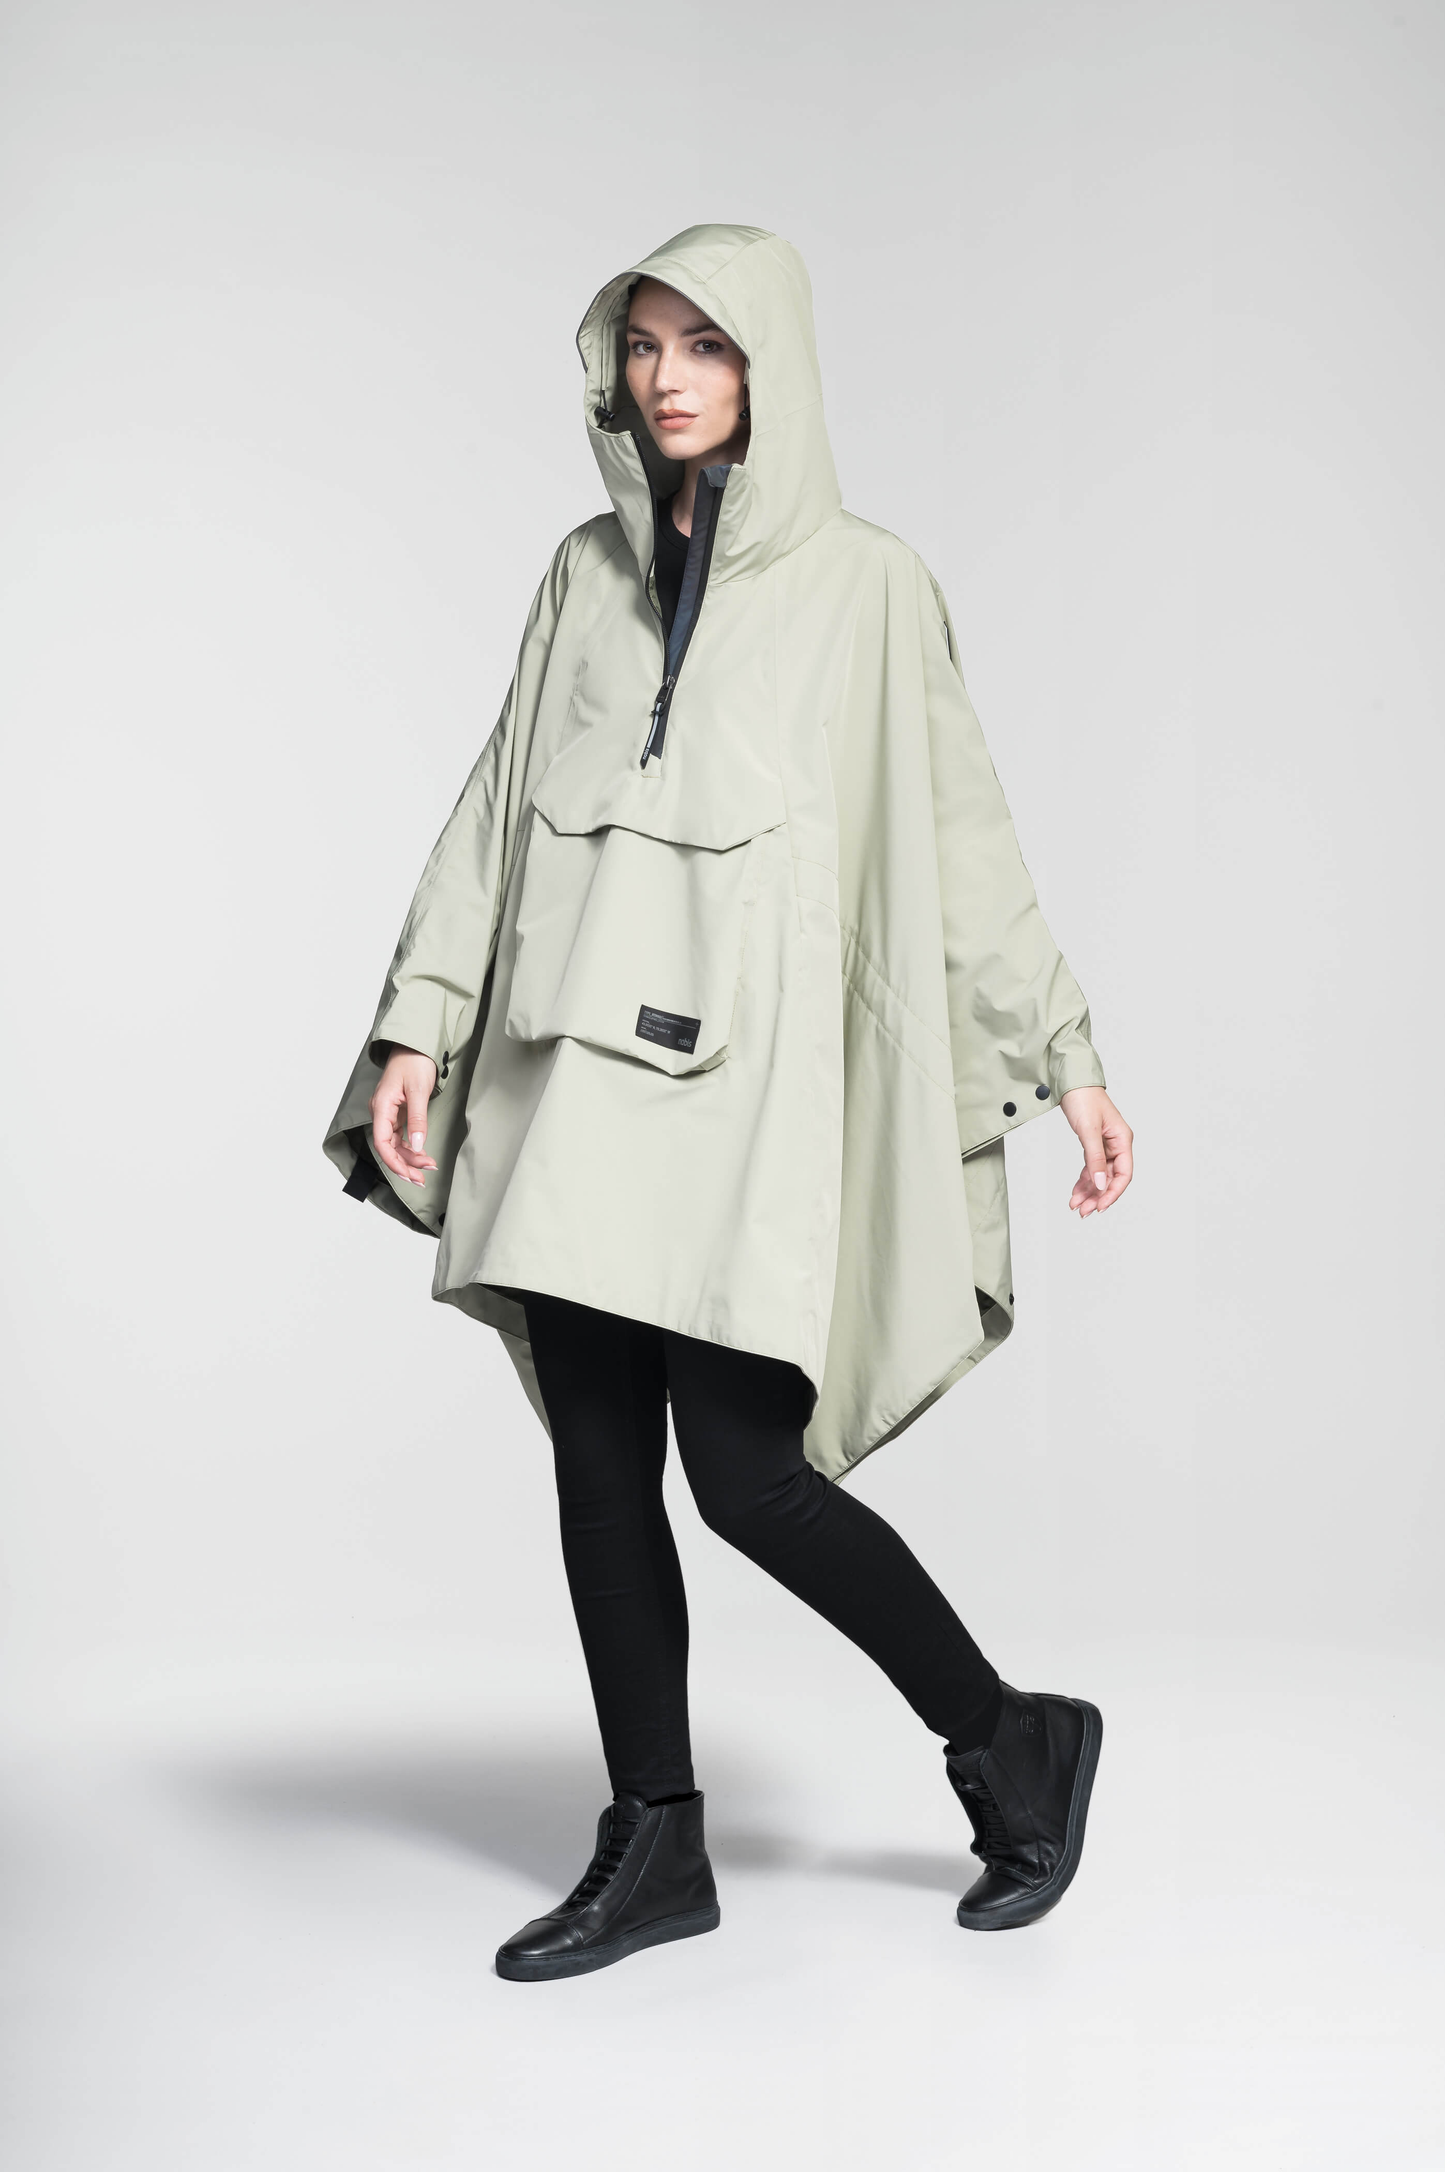 Hydra Unisex Performance Poncho in thigh length, non-removable hood, vertical half-zipper along centre front collar, hidden side-entry waist zipper pockets, adjustable webbing straps and snap closure cuffs, and packable to front kangaroo pocket with flap opening, in Tea